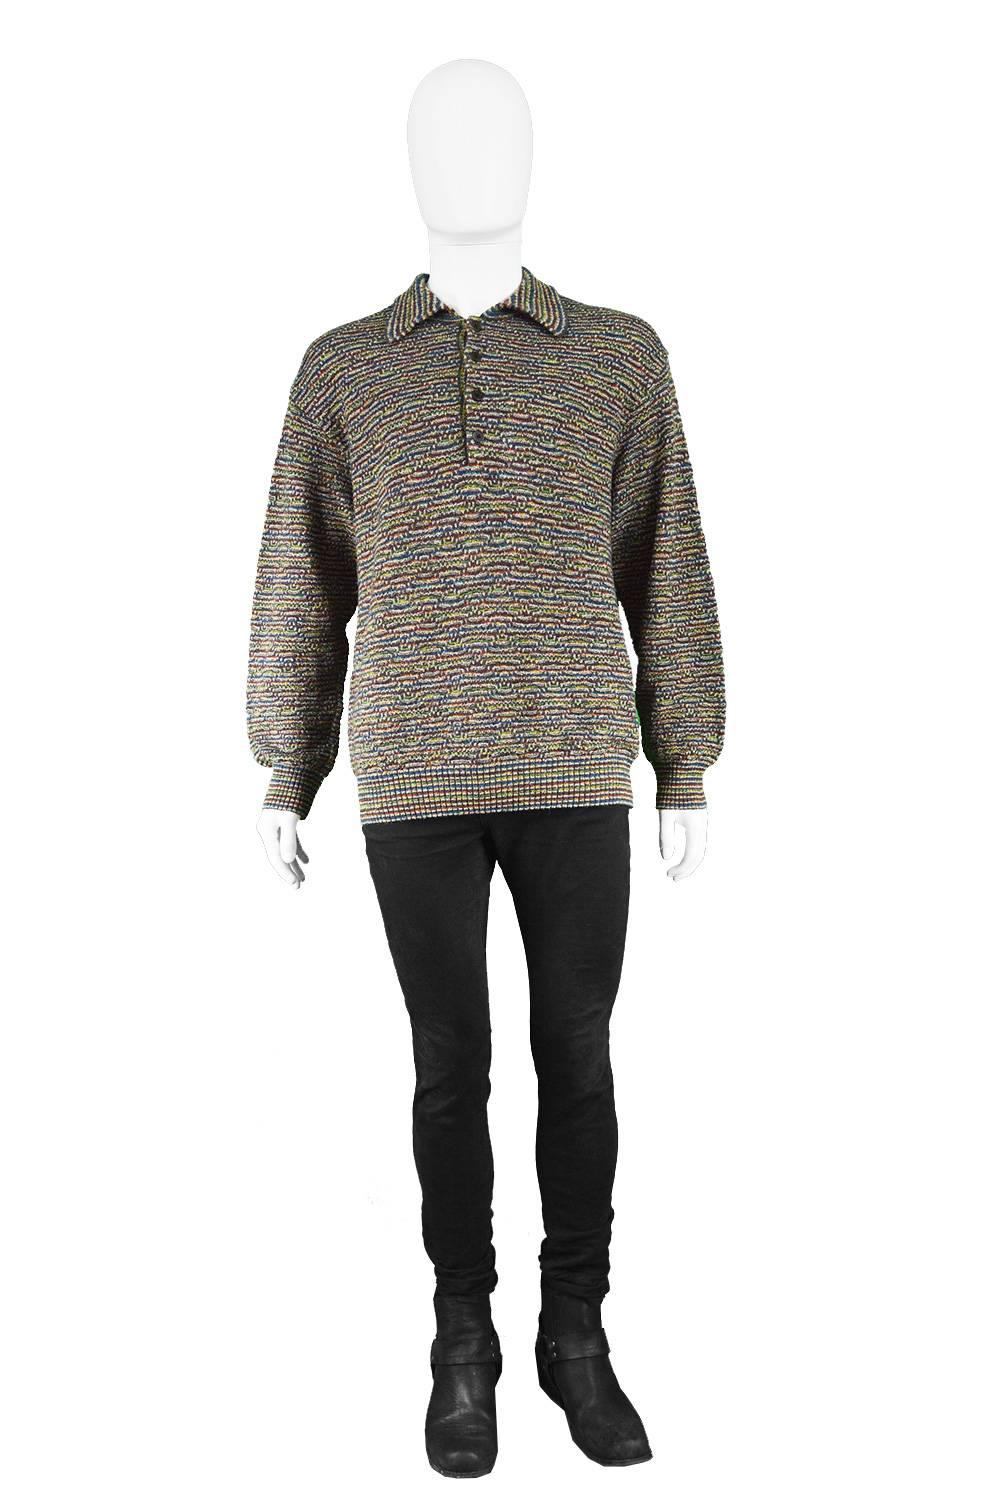 Missoni Mens Multicolored Textured Wool, Acrylic & Alpaca Knit Sweater, 1990s

Size: Marked EU 50 which is roughly a men's Med-Large.
Chest - 46” / 117cm (has a loose, slouchy fit)
Length (Shoulder to Hem) - 26” / 66cm
Shoulder to Shoulder - 21”